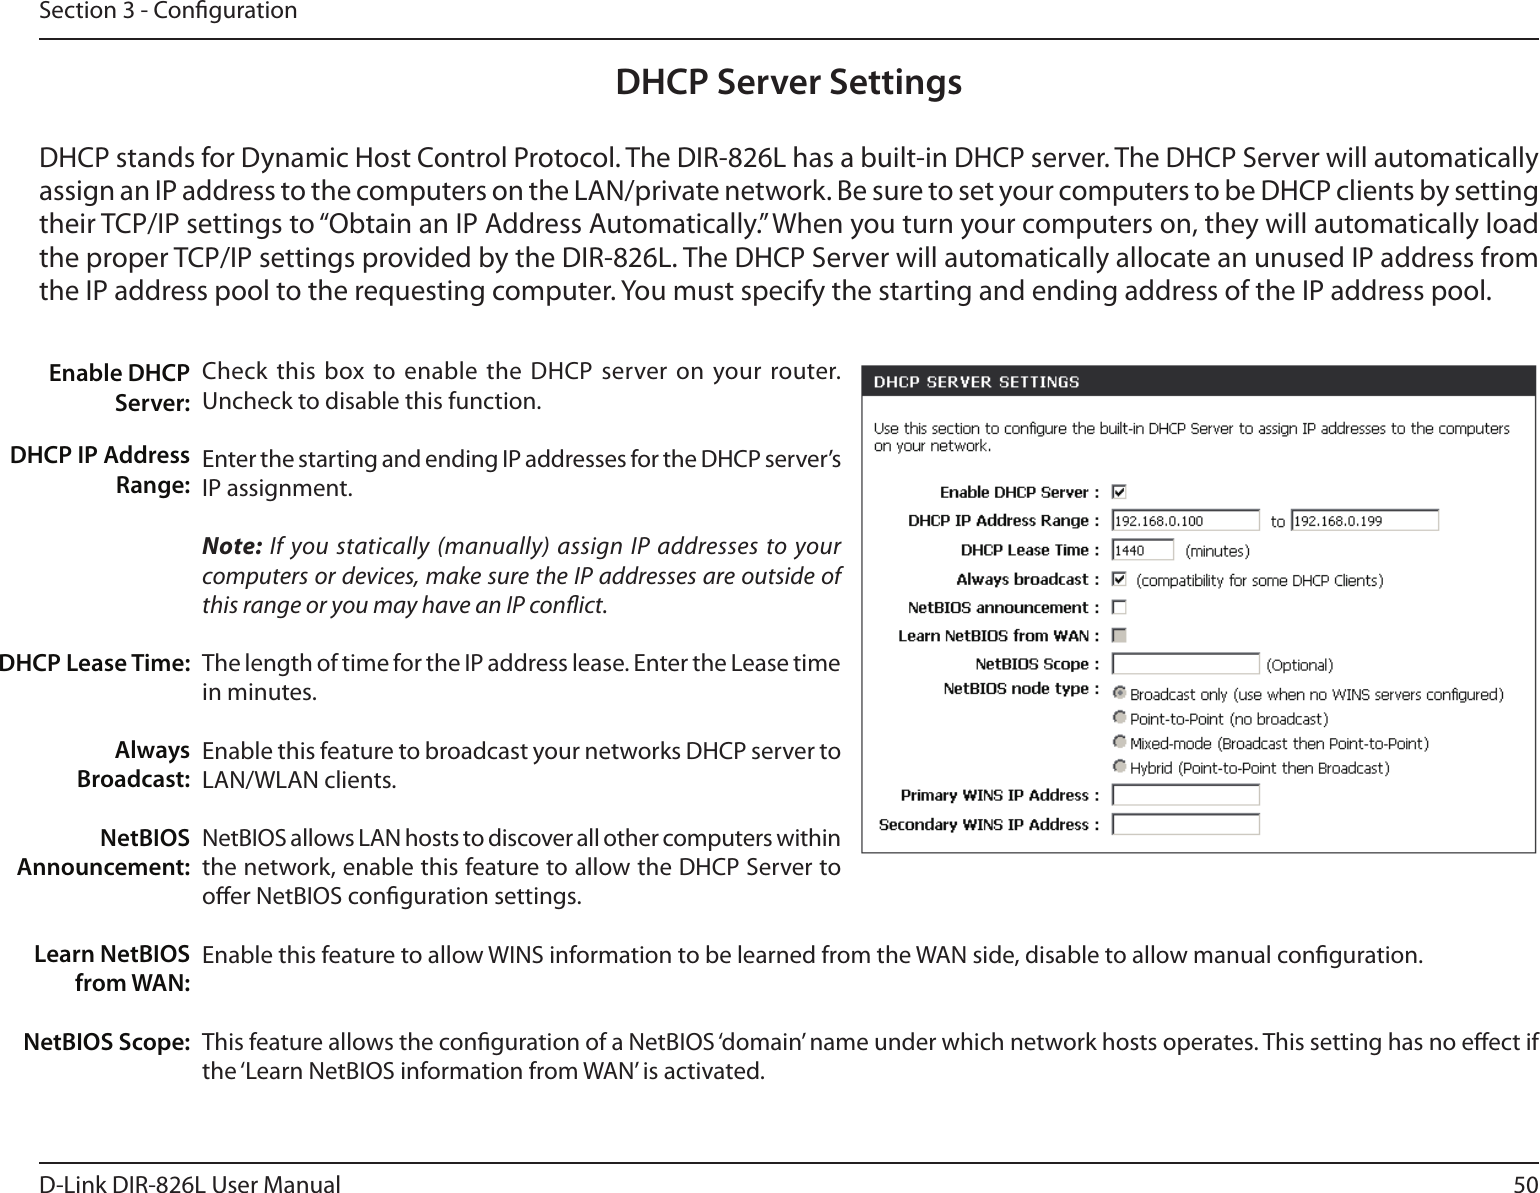 50D-Link DIR-826L User ManualSection 3 - CongurationDHCP Server SettingsDHCP stands for Dynamic Host Control Protocol. The DIR-826L has a built-in DHCP server. The DHCP Server will automatically assign an IP address to the computers on the LAN/private network. Be sure to set your computers to be DHCP clients by setting their TCP/IP settings to “Obtain an IP Address Automatically.” When you turn your computers on, they will automatically load the proper TCP/IP settings provided by the DIR-826L. The DHCP Server will automatically allocate an unused IP address from the IP address pool to the requesting computer. You must specify the starting and ending address of the IP address pool.Check this  box to enable  the DHCP  server on your router. Uncheck to disable this function.Enter the starting and ending IP addresses for the DHCP server’s IP assignment.Note: If you statically (manually) assign IP addresses to your computers or devices, make sure the IP addresses are outside of this range or you may have an IP conict. The length of time for the IP address lease. Enter the Lease time in minutes.Enable this feature to broadcast your networks DHCP server to LAN/WLAN clients.NetBIOS allows LAN hosts to discover all other computers within the network, enable this feature to allow the DHCP Server to oer NetBIOS conguration settings.Enable this feature to allow WINS information to be learned from the WAN side, disable to allow manual conguration.This feature allows the conguration of a NetBIOS ‘domain’ name under which network hosts operates. This setting has no eect if the ‘Learn NetBIOS information from WAN’ is activated.Enable DHCP Server:DHCP IP Address Range:DHCP Lease Time:Always Broadcast:NetBIOS Announcement:Learn NetBIOS from WAN:NetBIOS Scope: